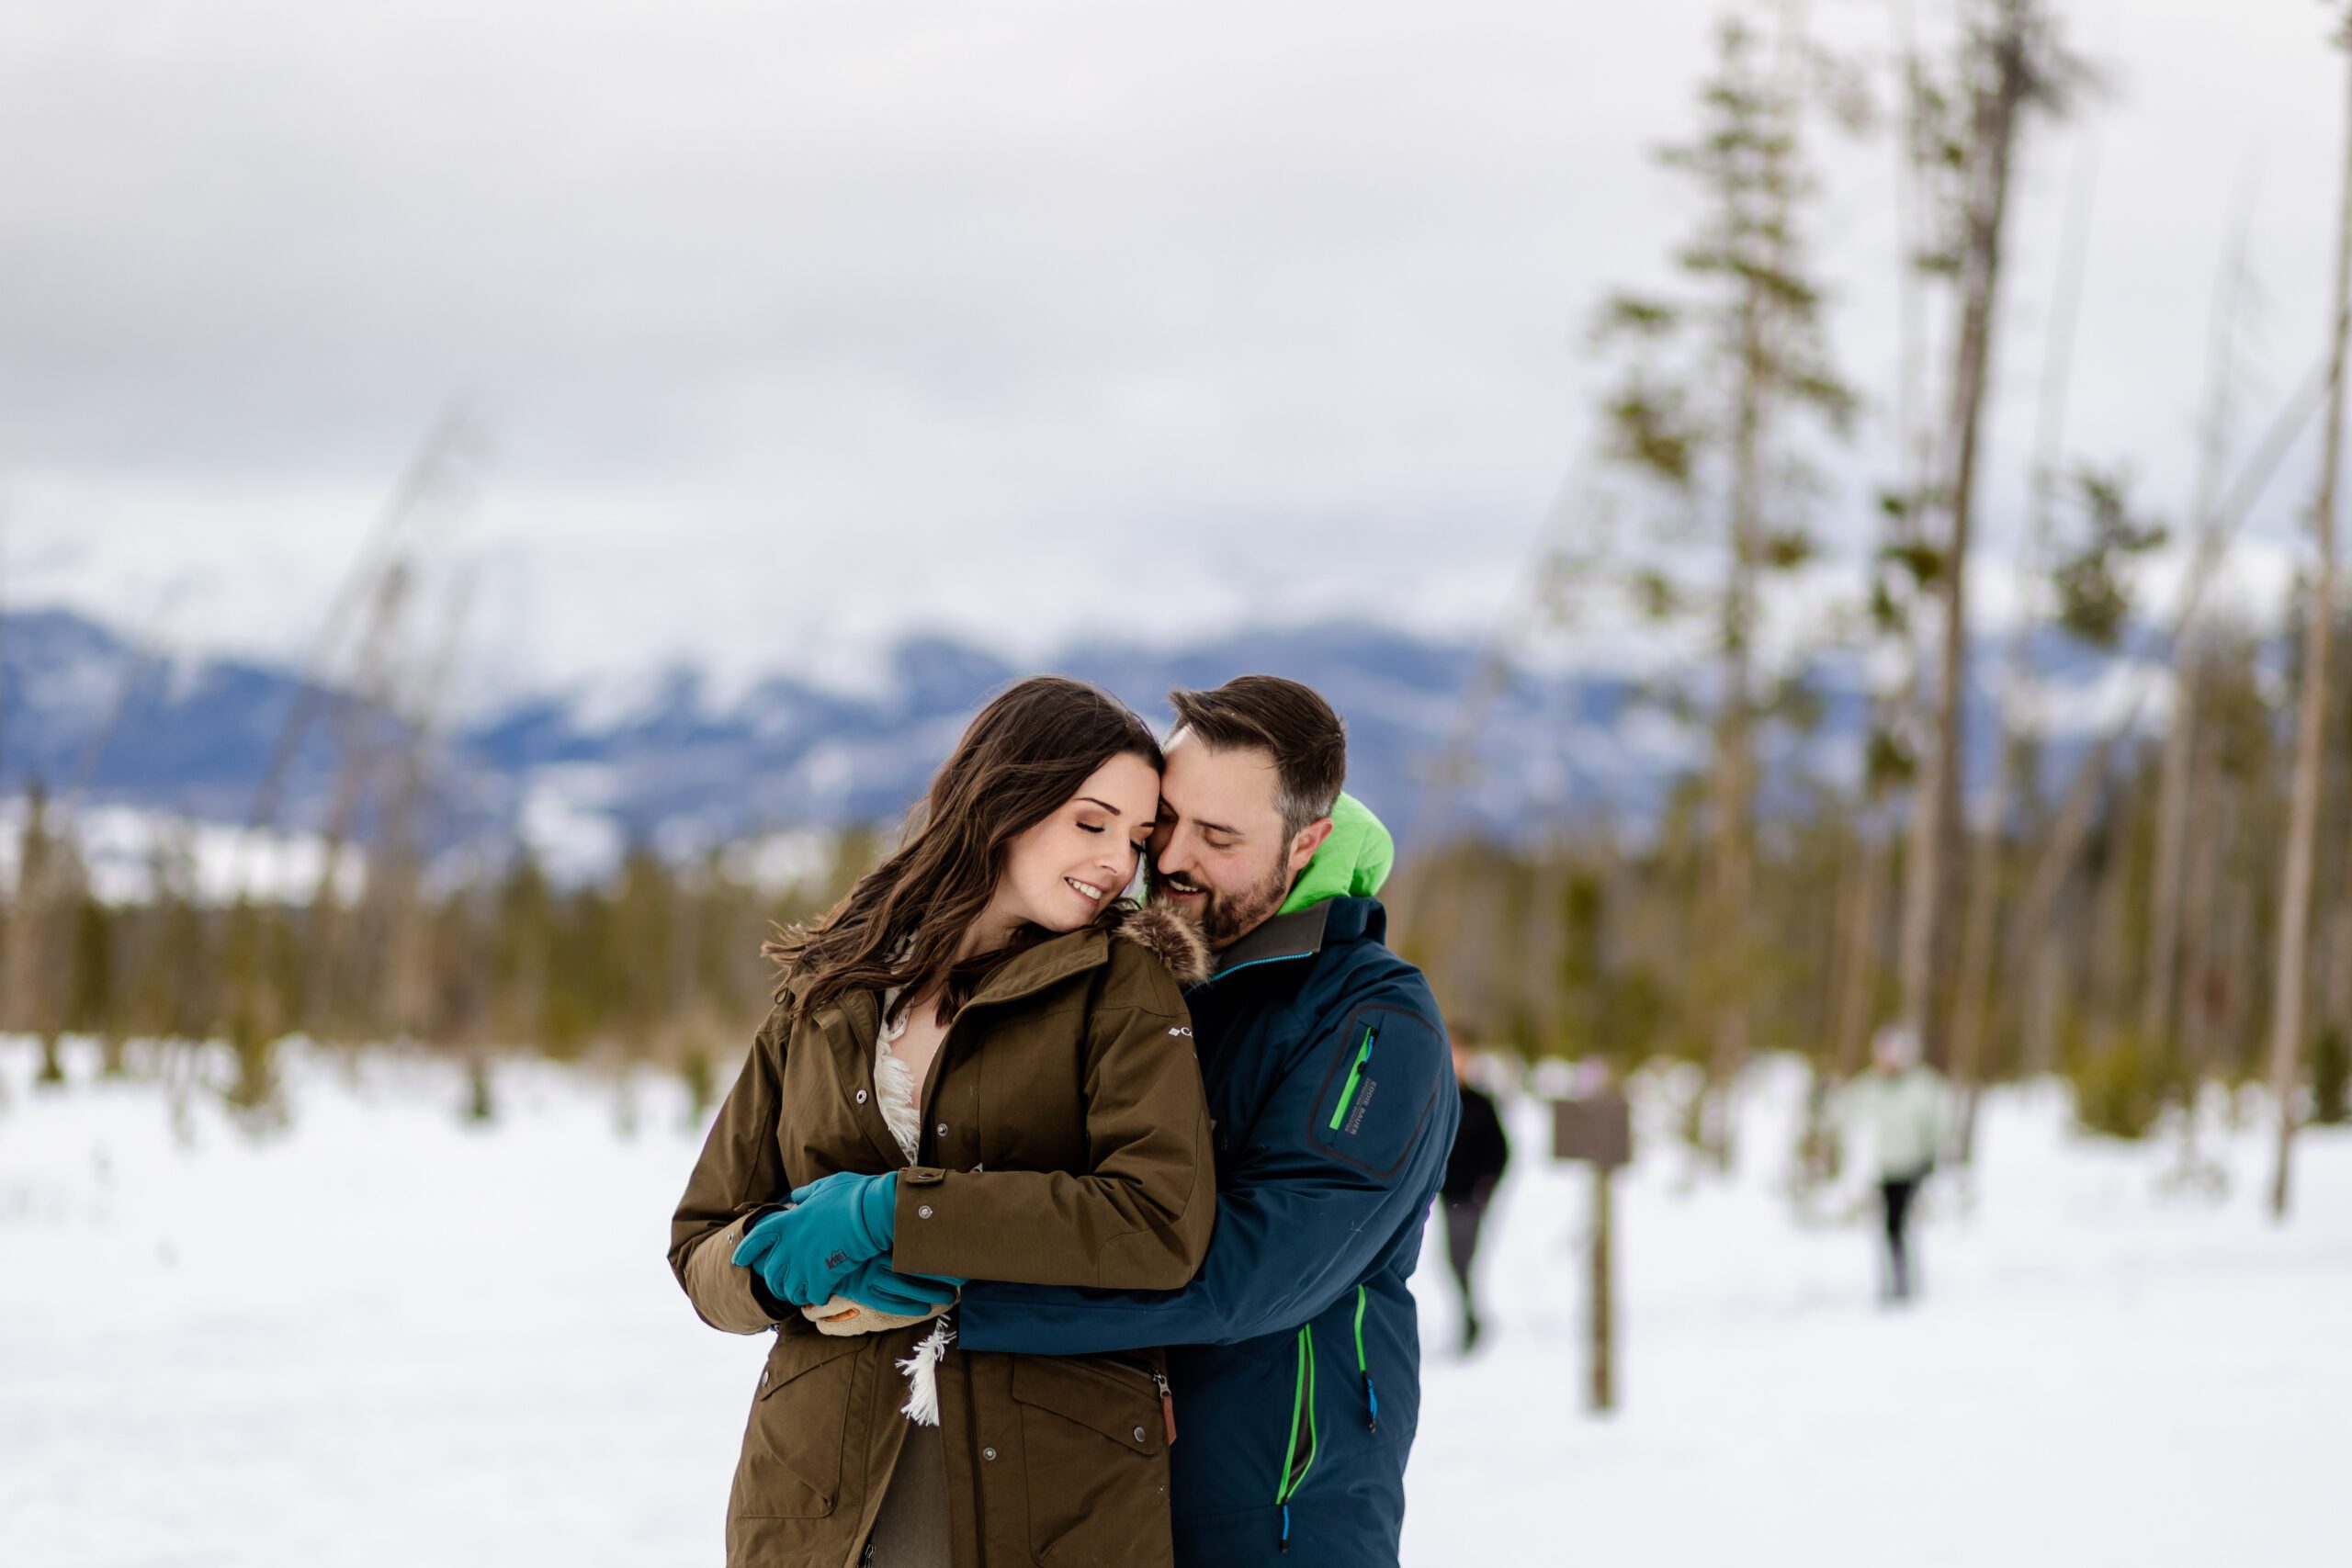 the bride and groom in their winter jackets at their Winter Park elopement.